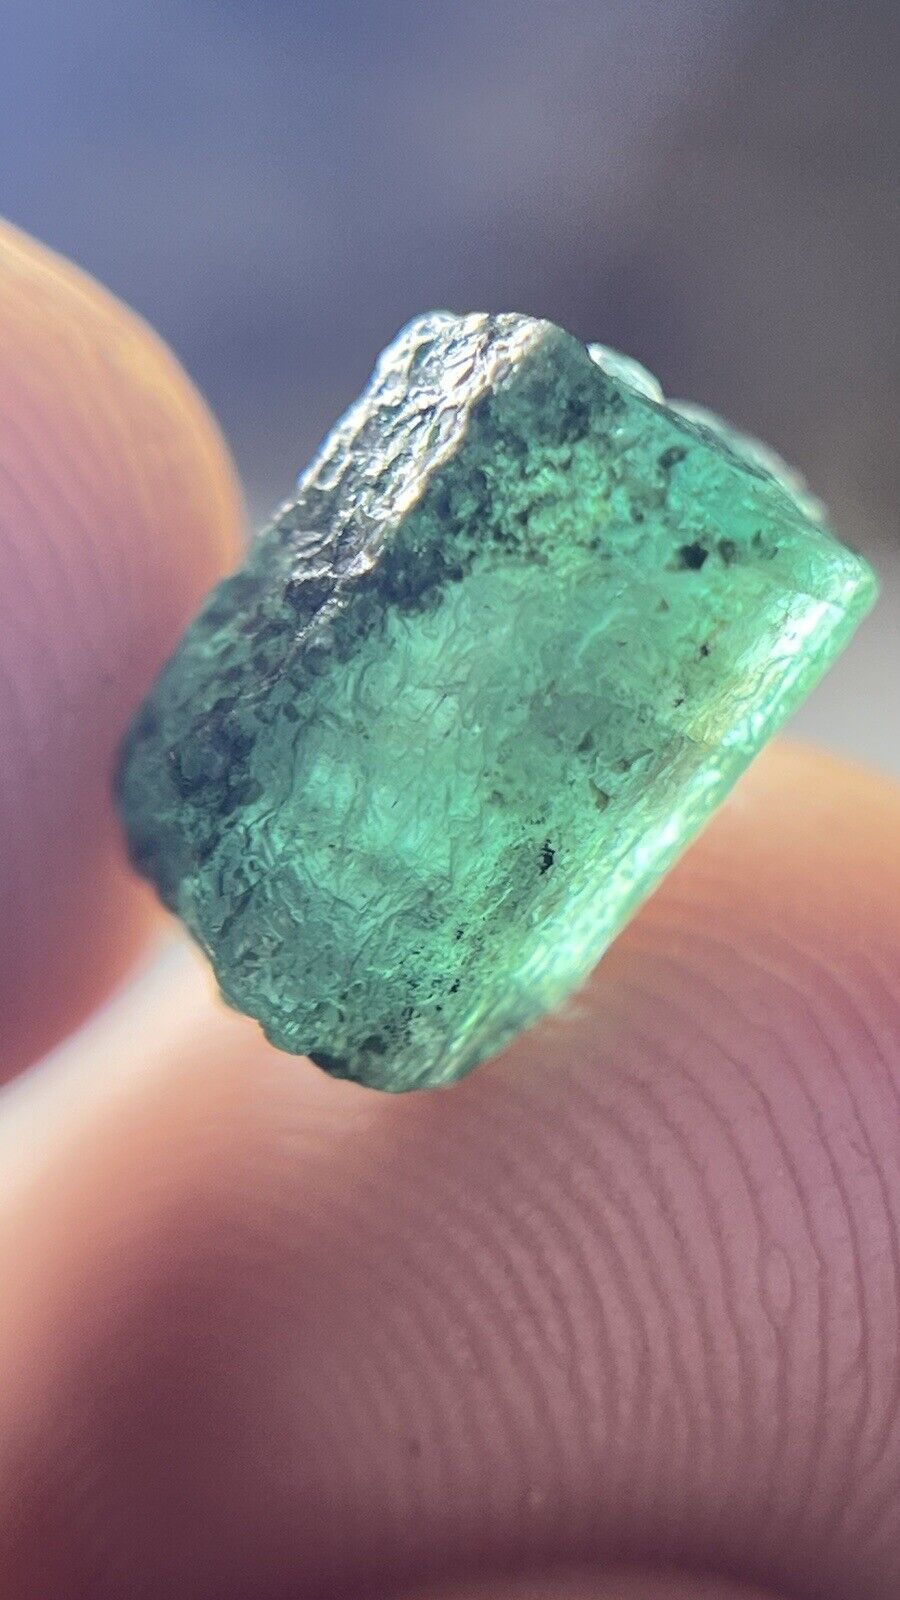 4.50 Carats Terminated Green Gemmy Emerald Crystal With Biotite Muscovite@Zim